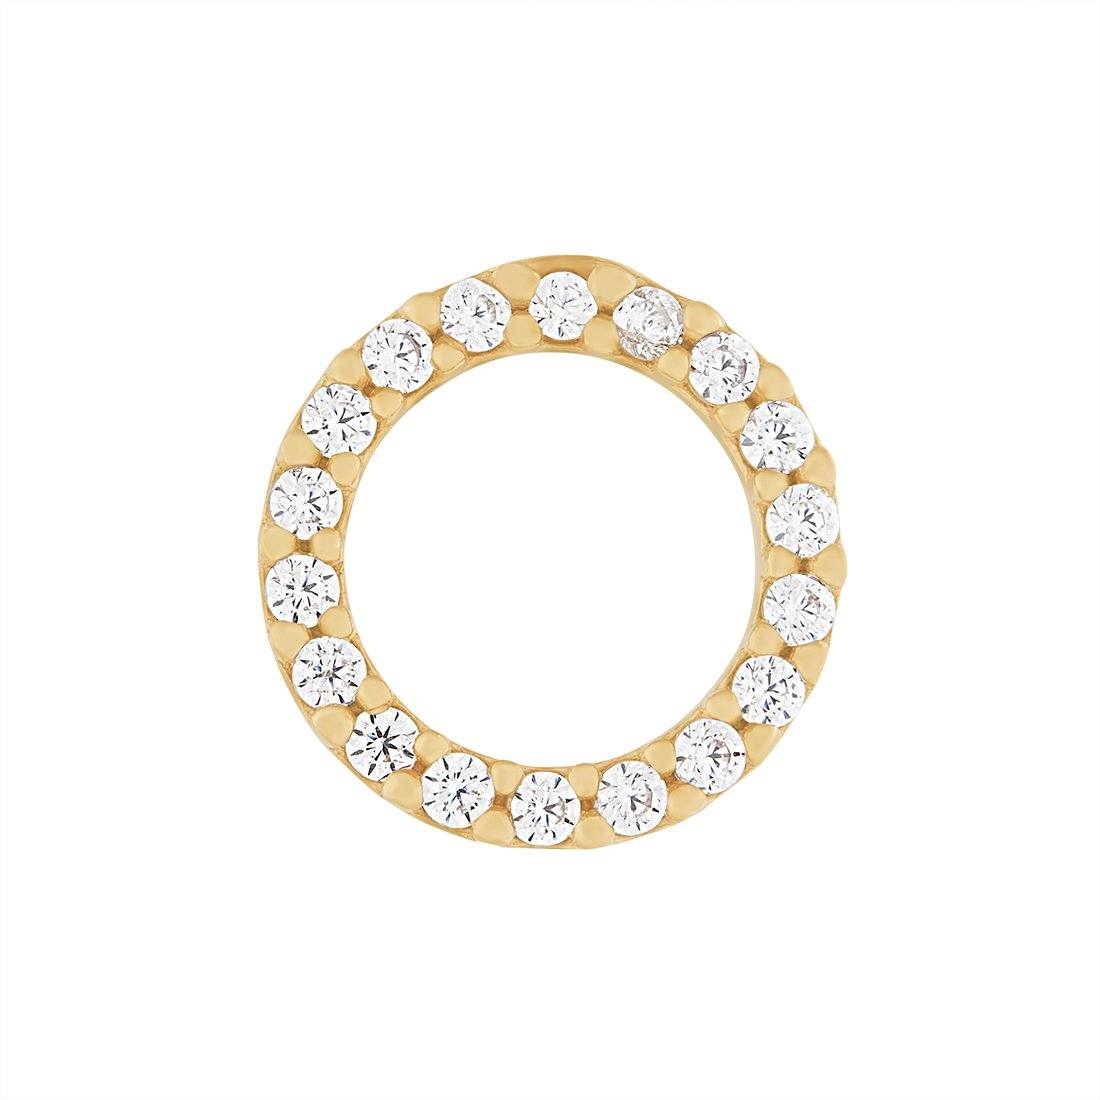 9ct Yellow Gold Silver Infused Circle Stud Earrings with Cubic Zircona Earrings Bevilles 